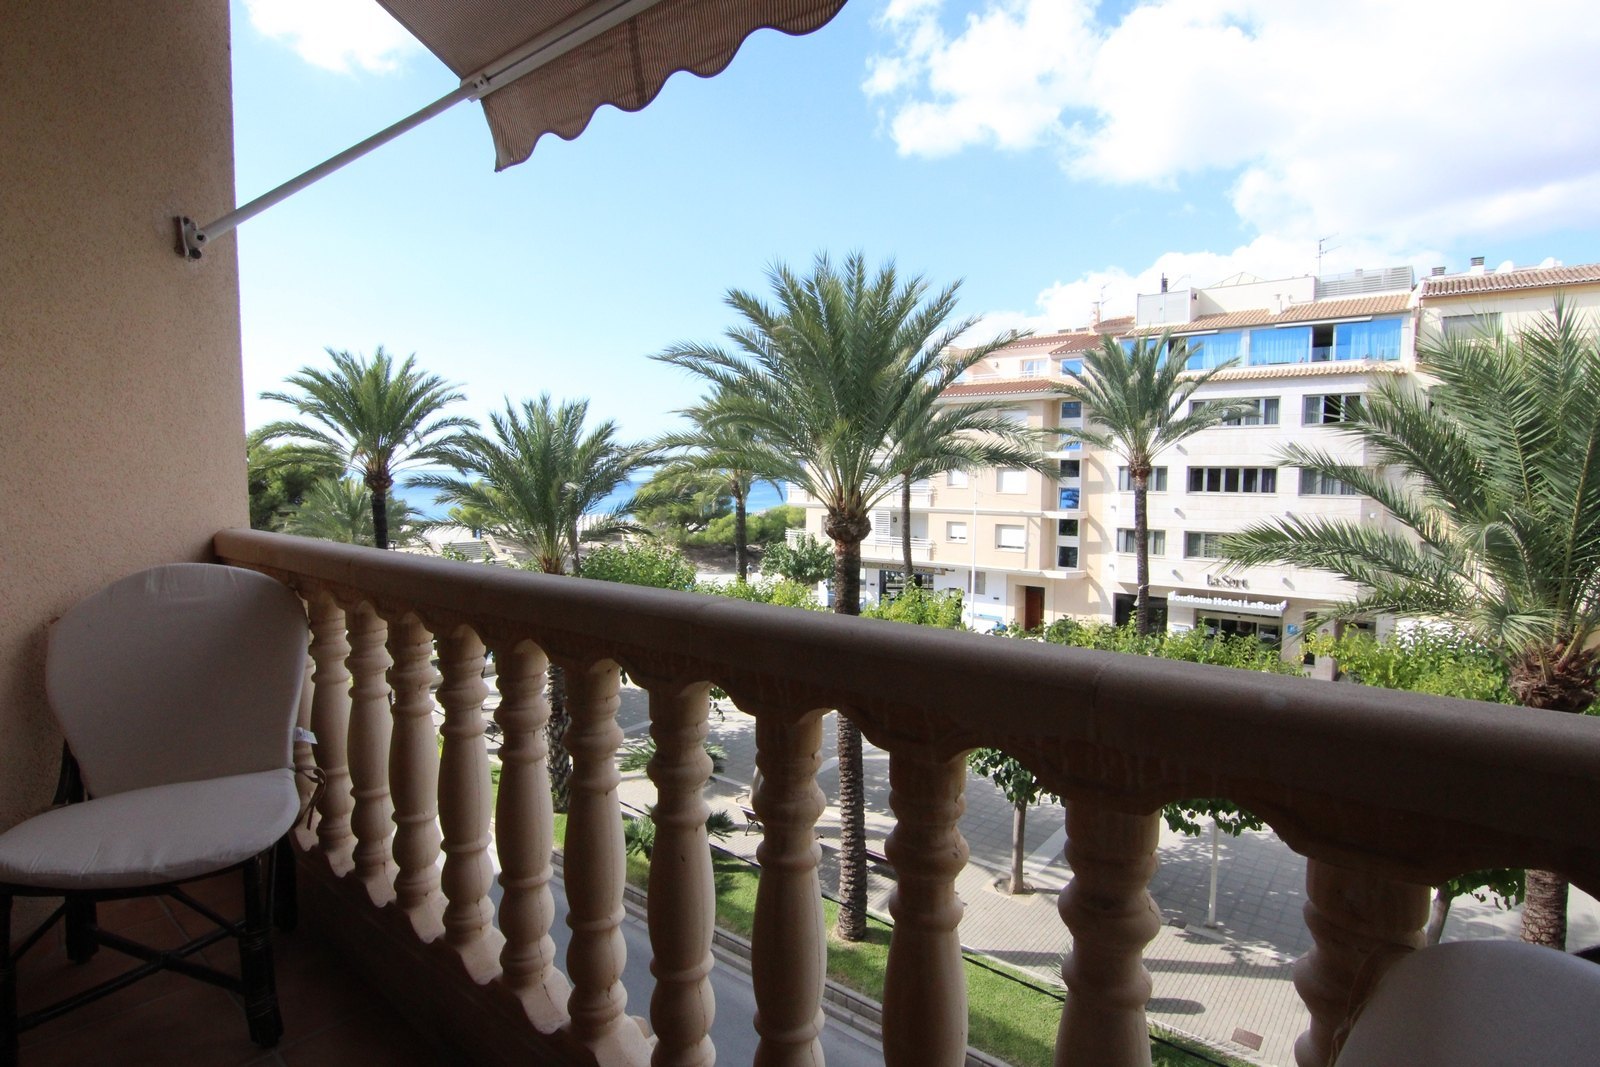 Apartment for sale in Moraira with views to the sea.